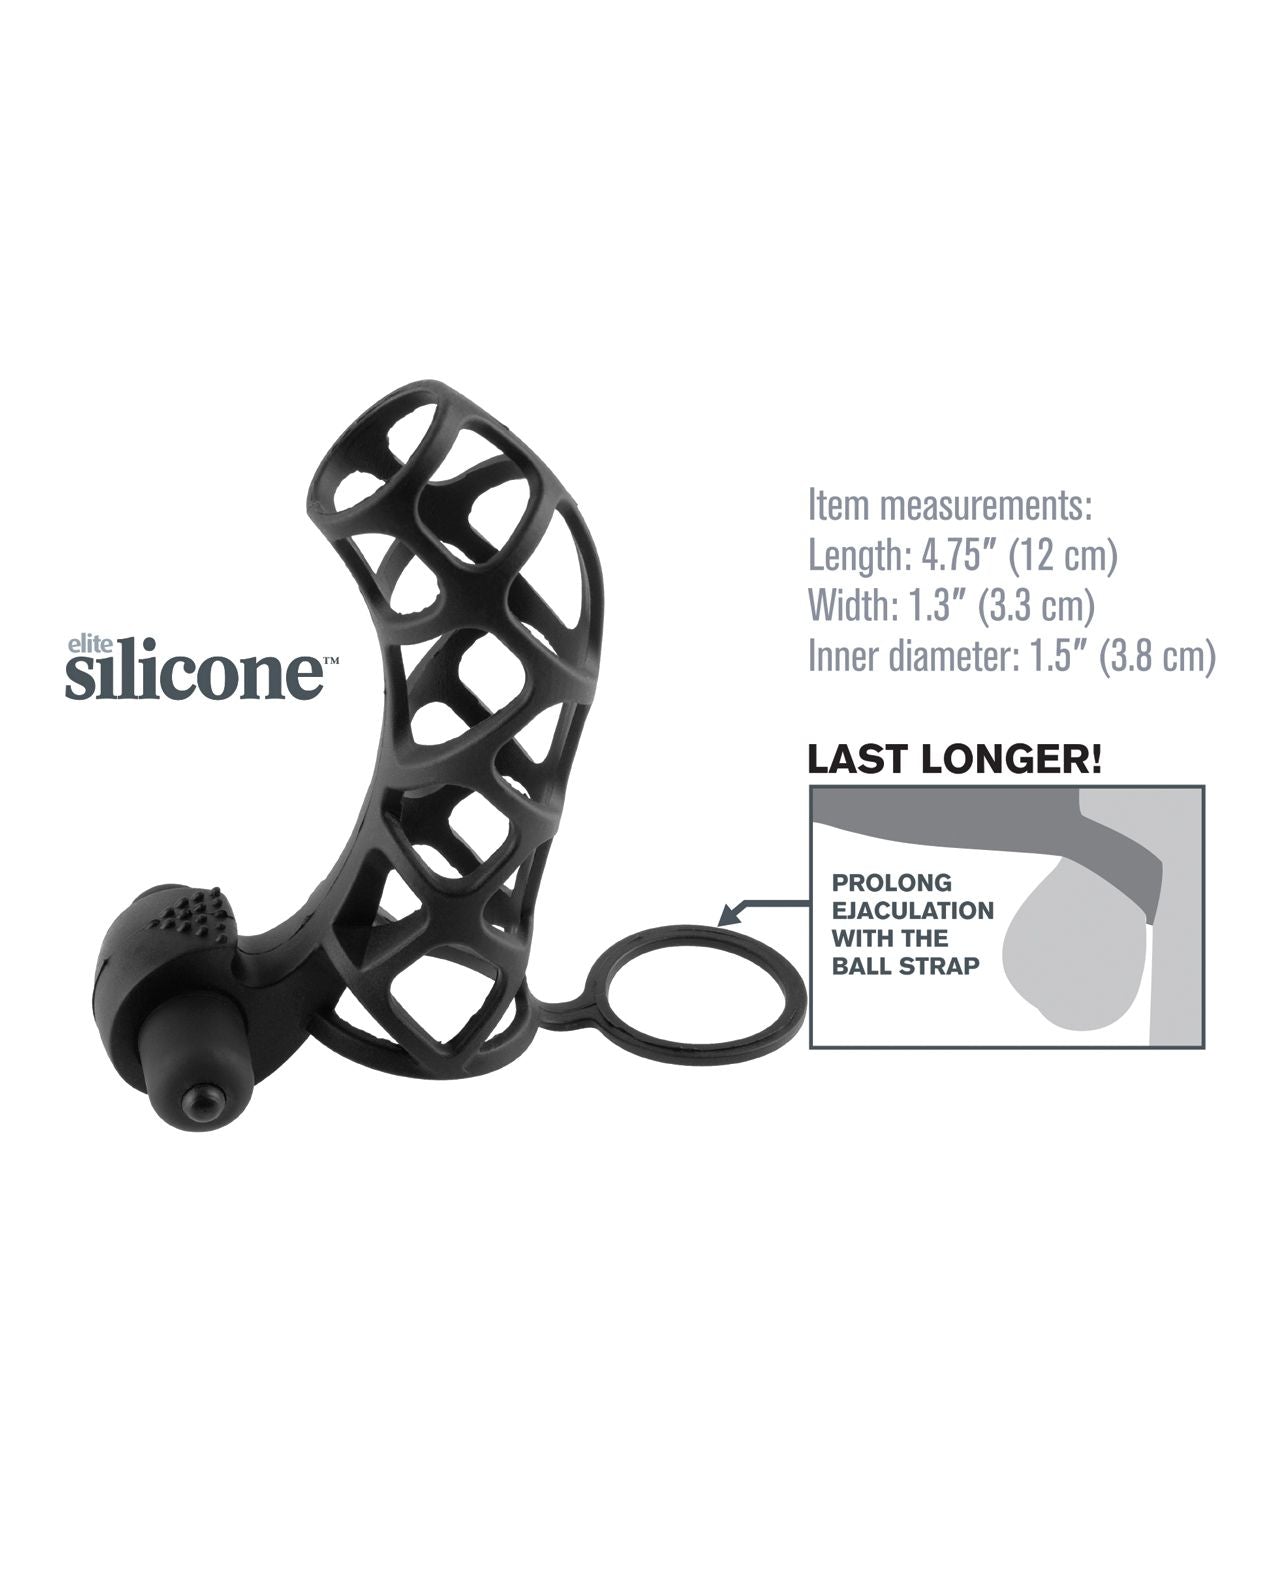 Fantasy X-tensions Extreme Silicone Power Cage Shipmysextoys